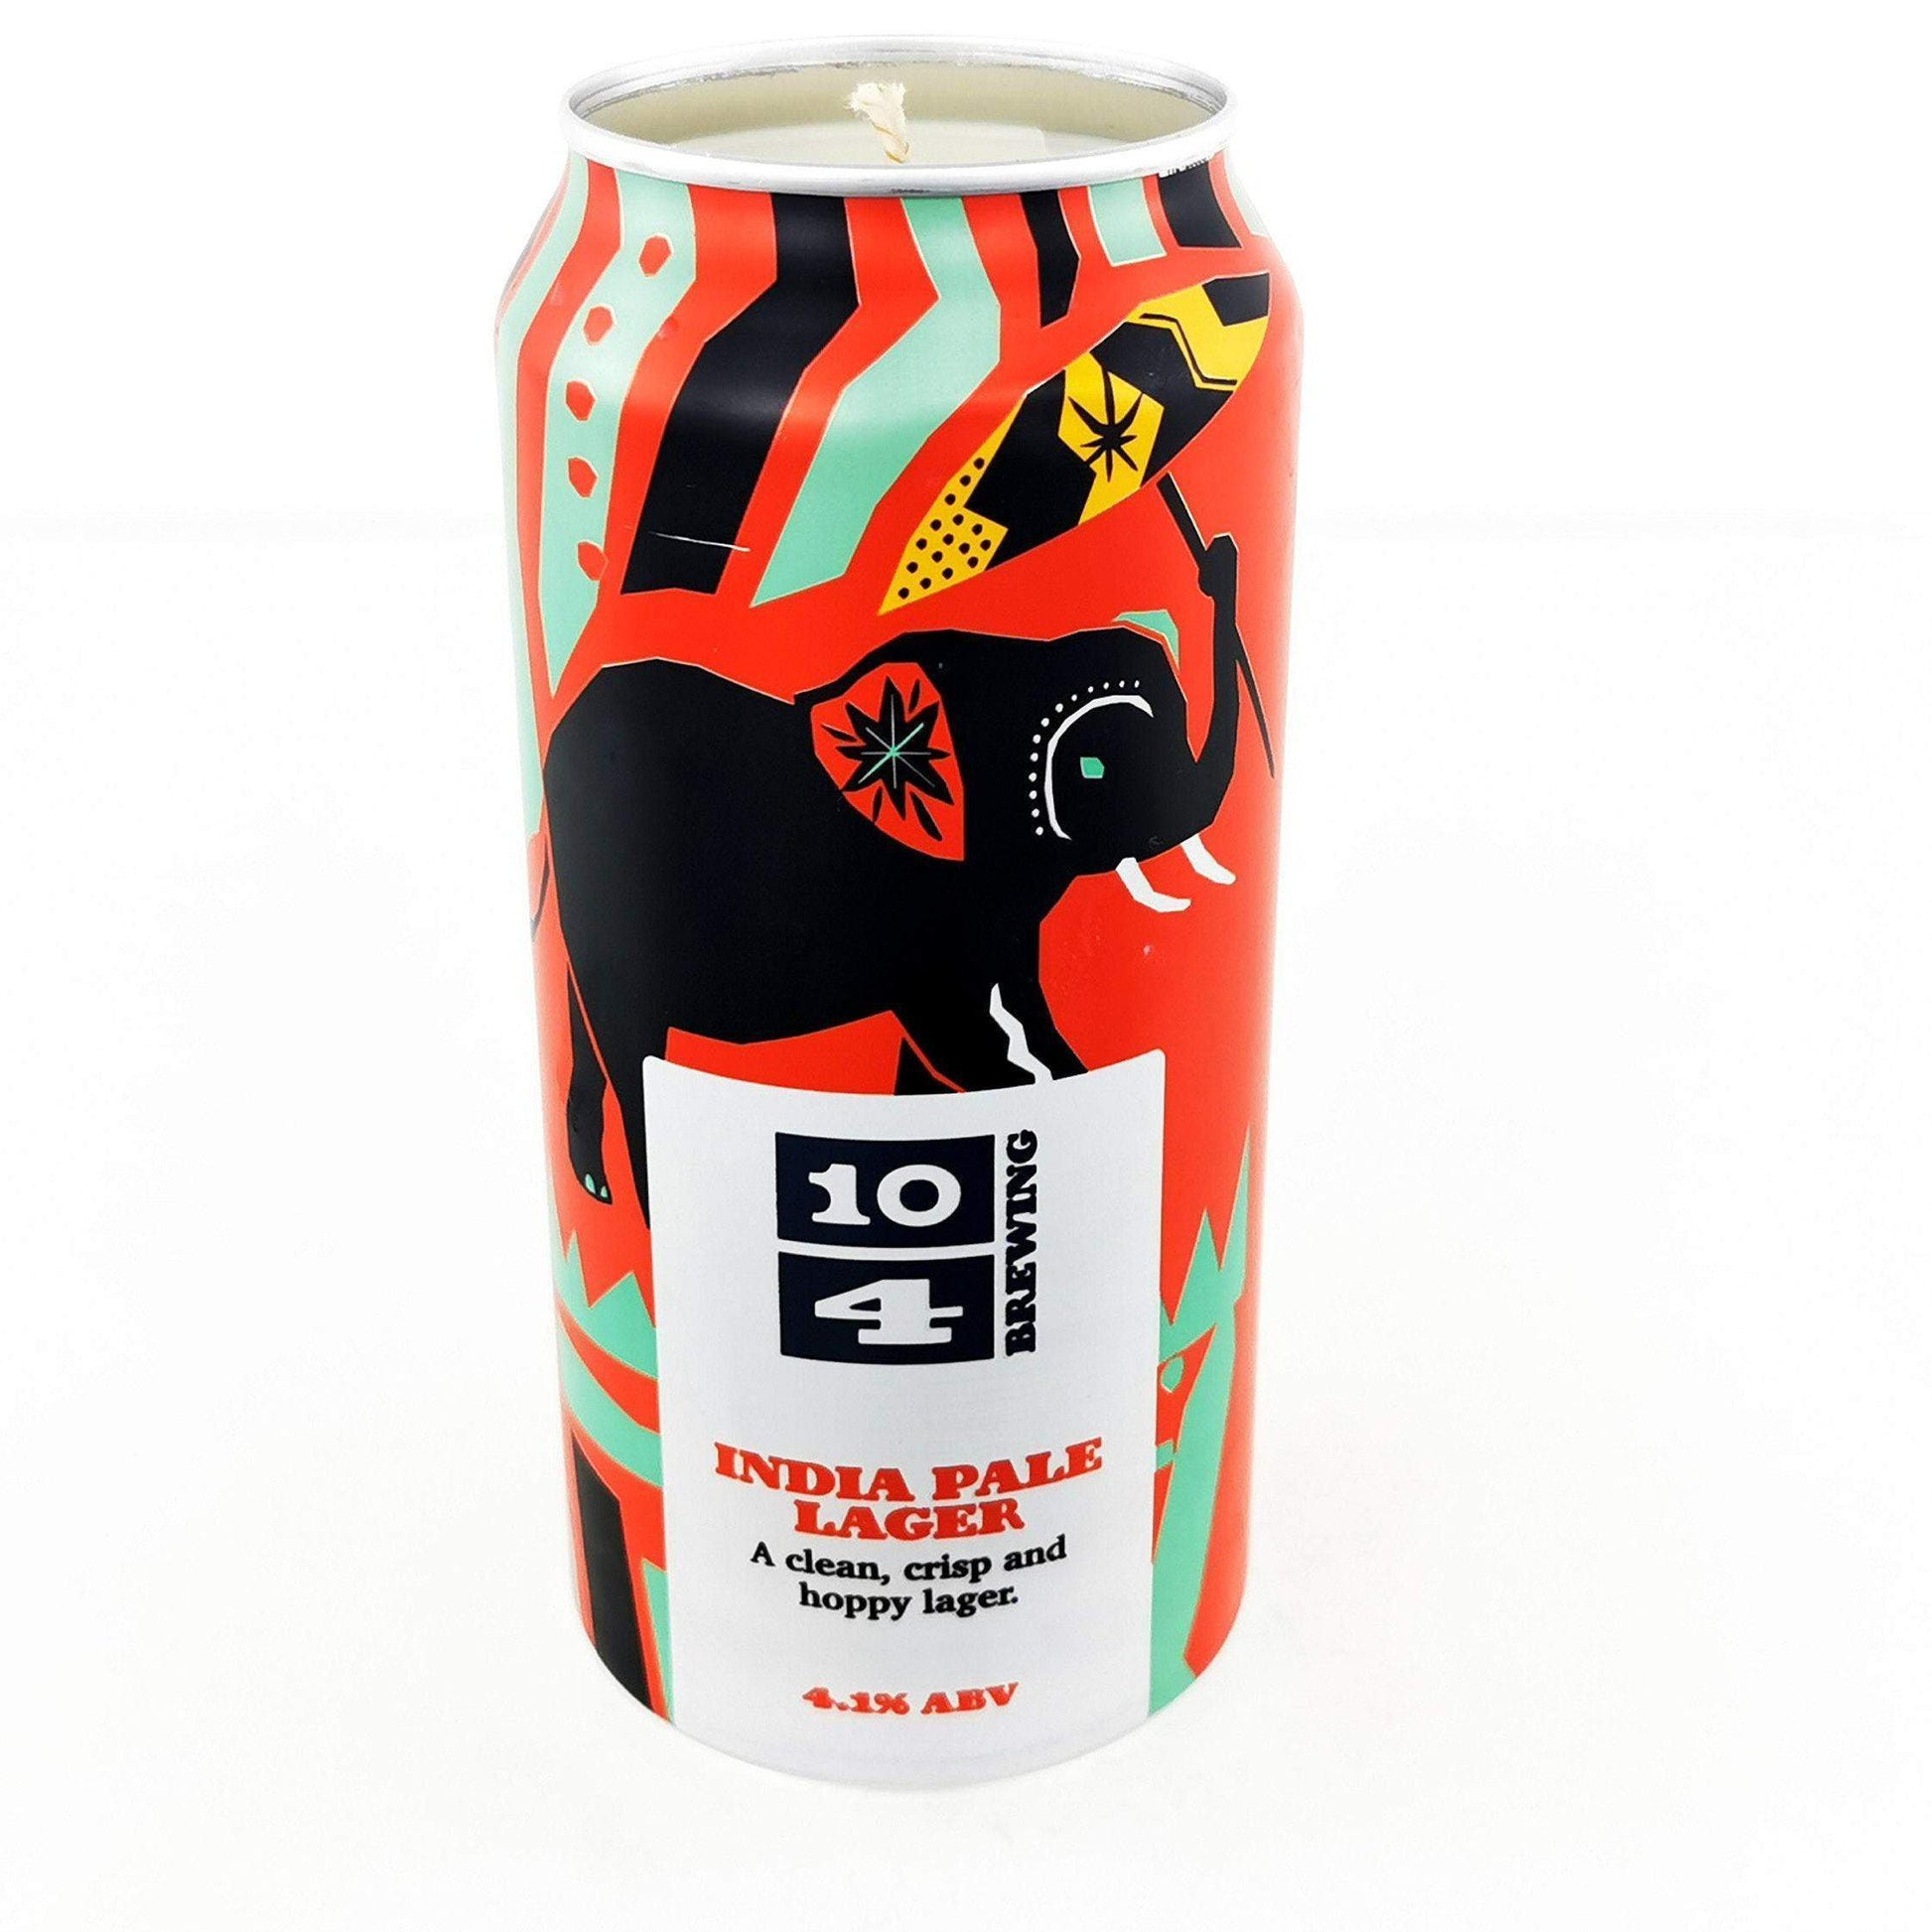 10 4 Brewing IPA Craft Beer Can Candle Beer Can Candles Adhock Homeware